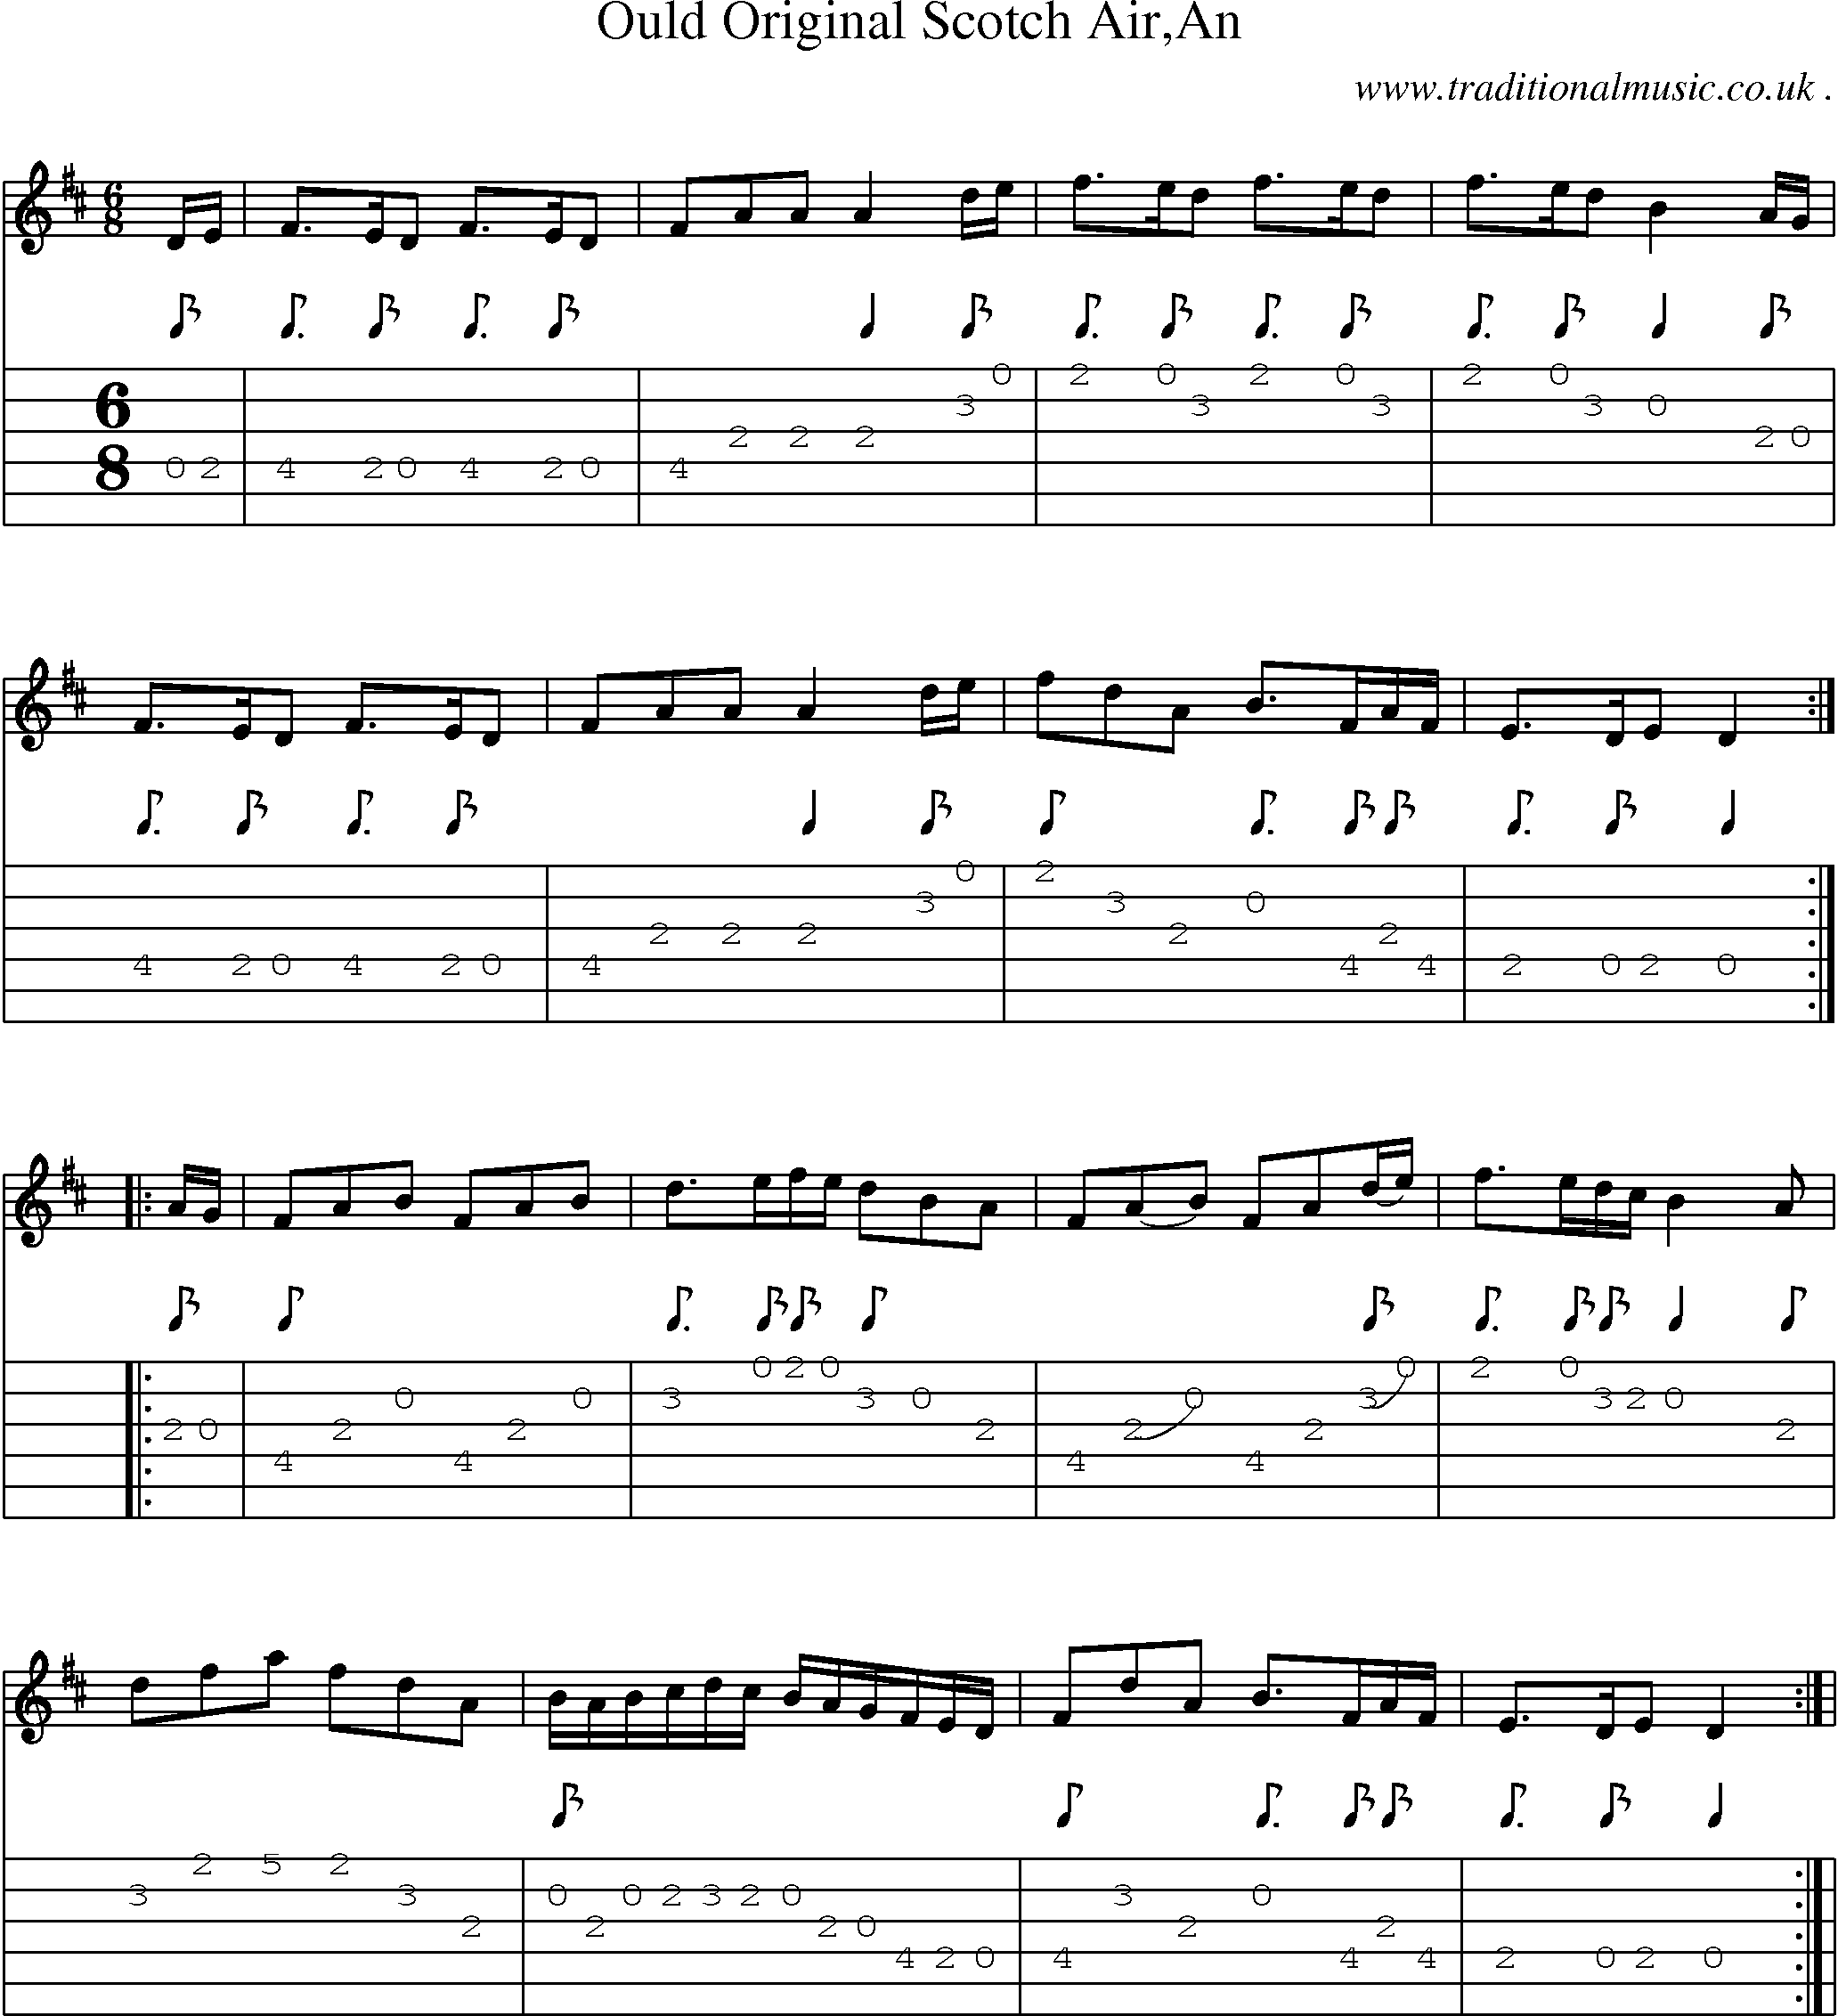 Sheet-Music and Guitar Tabs for Ould Original Scotch Airan